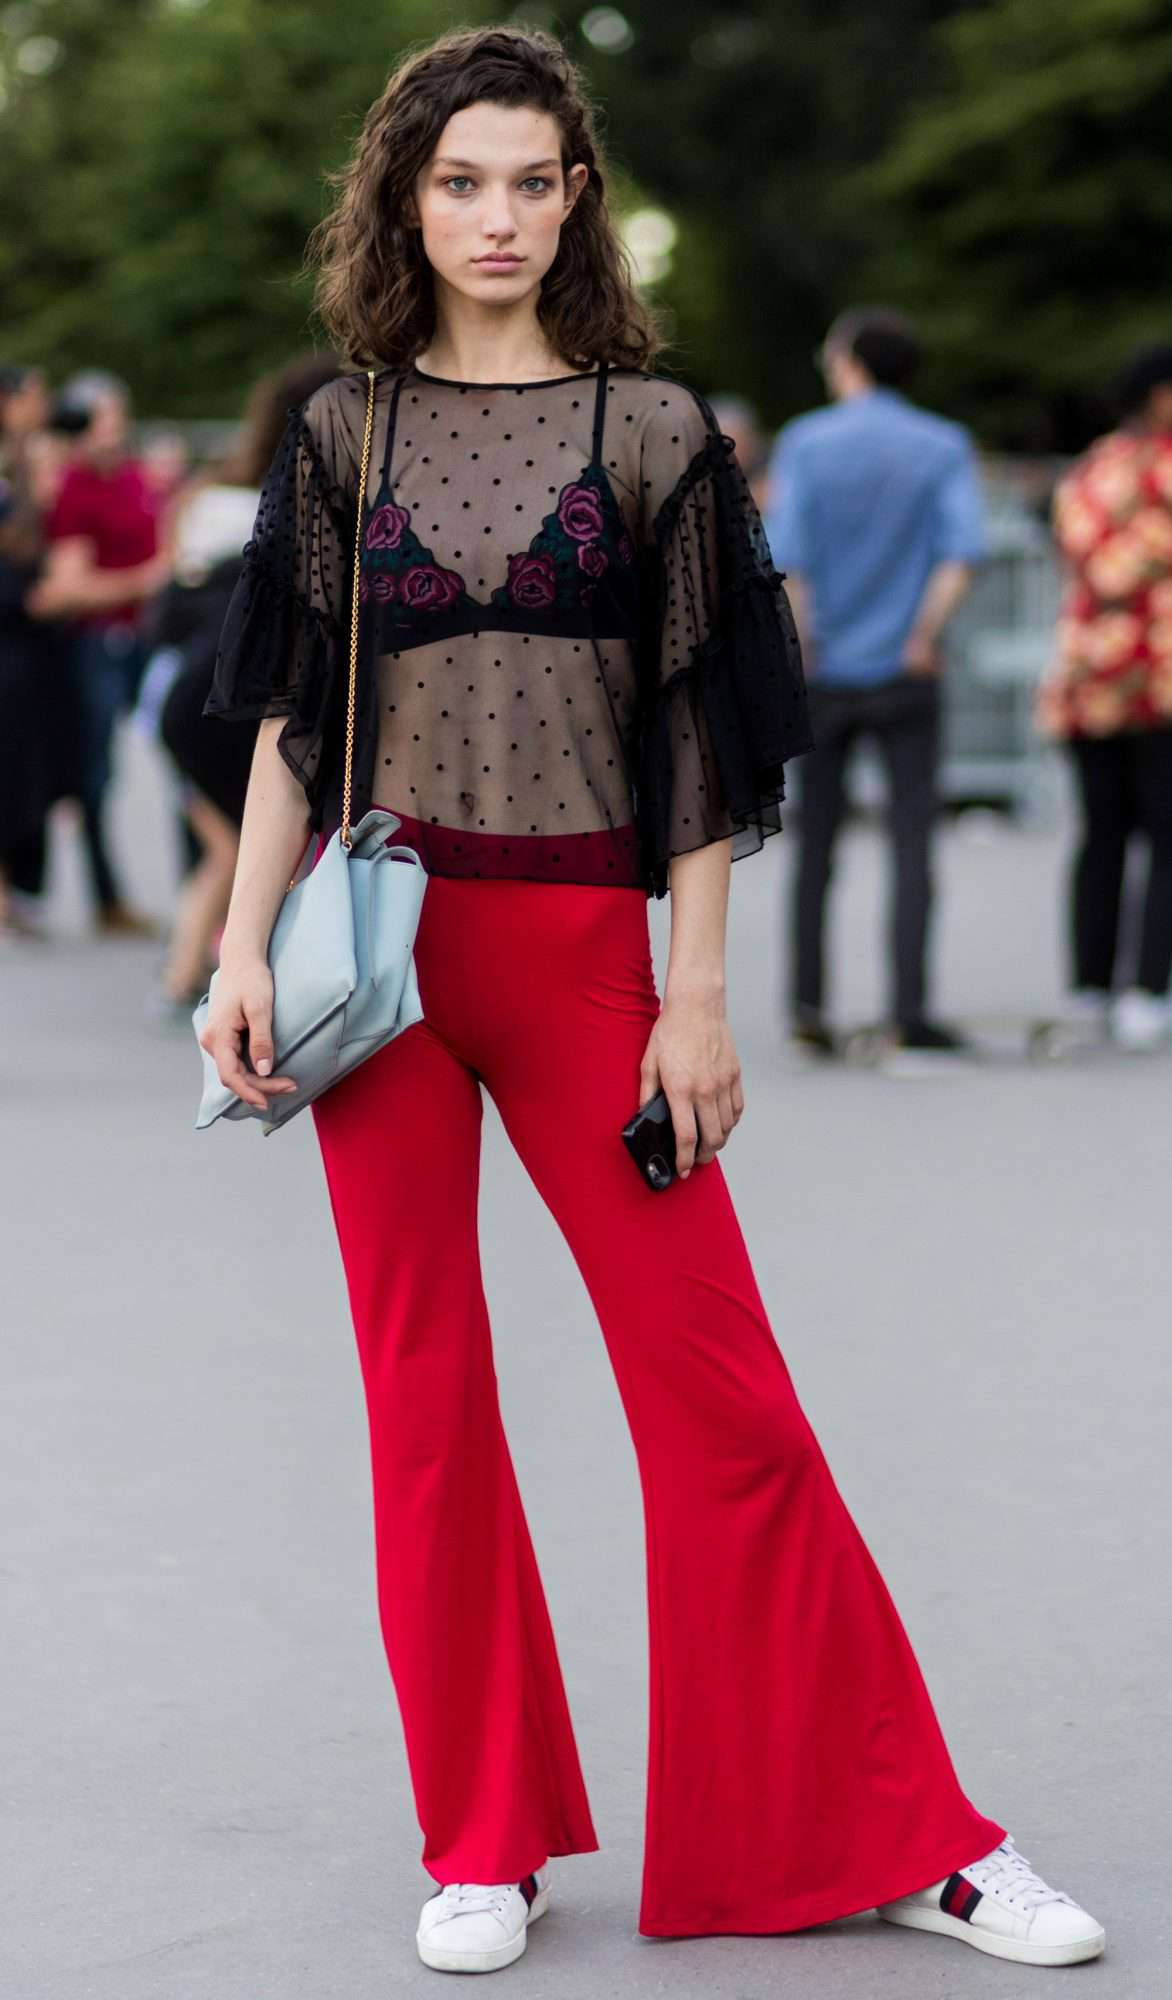 SHEER TOP AND SUPER FLARES